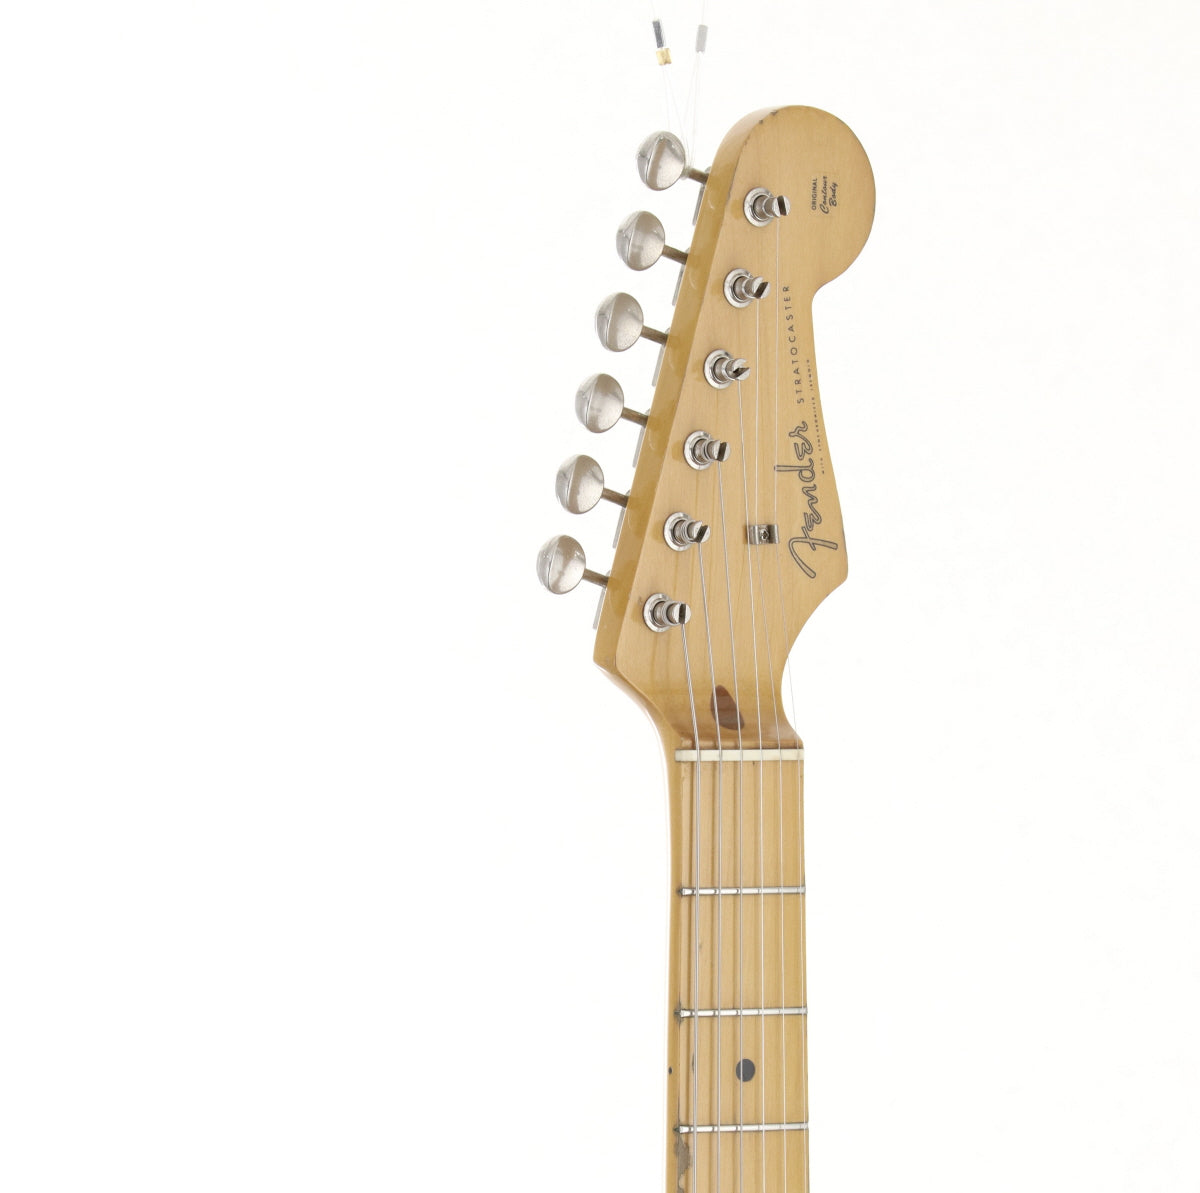 [SN Q017690] USED Fender / ST57 Modified [03]